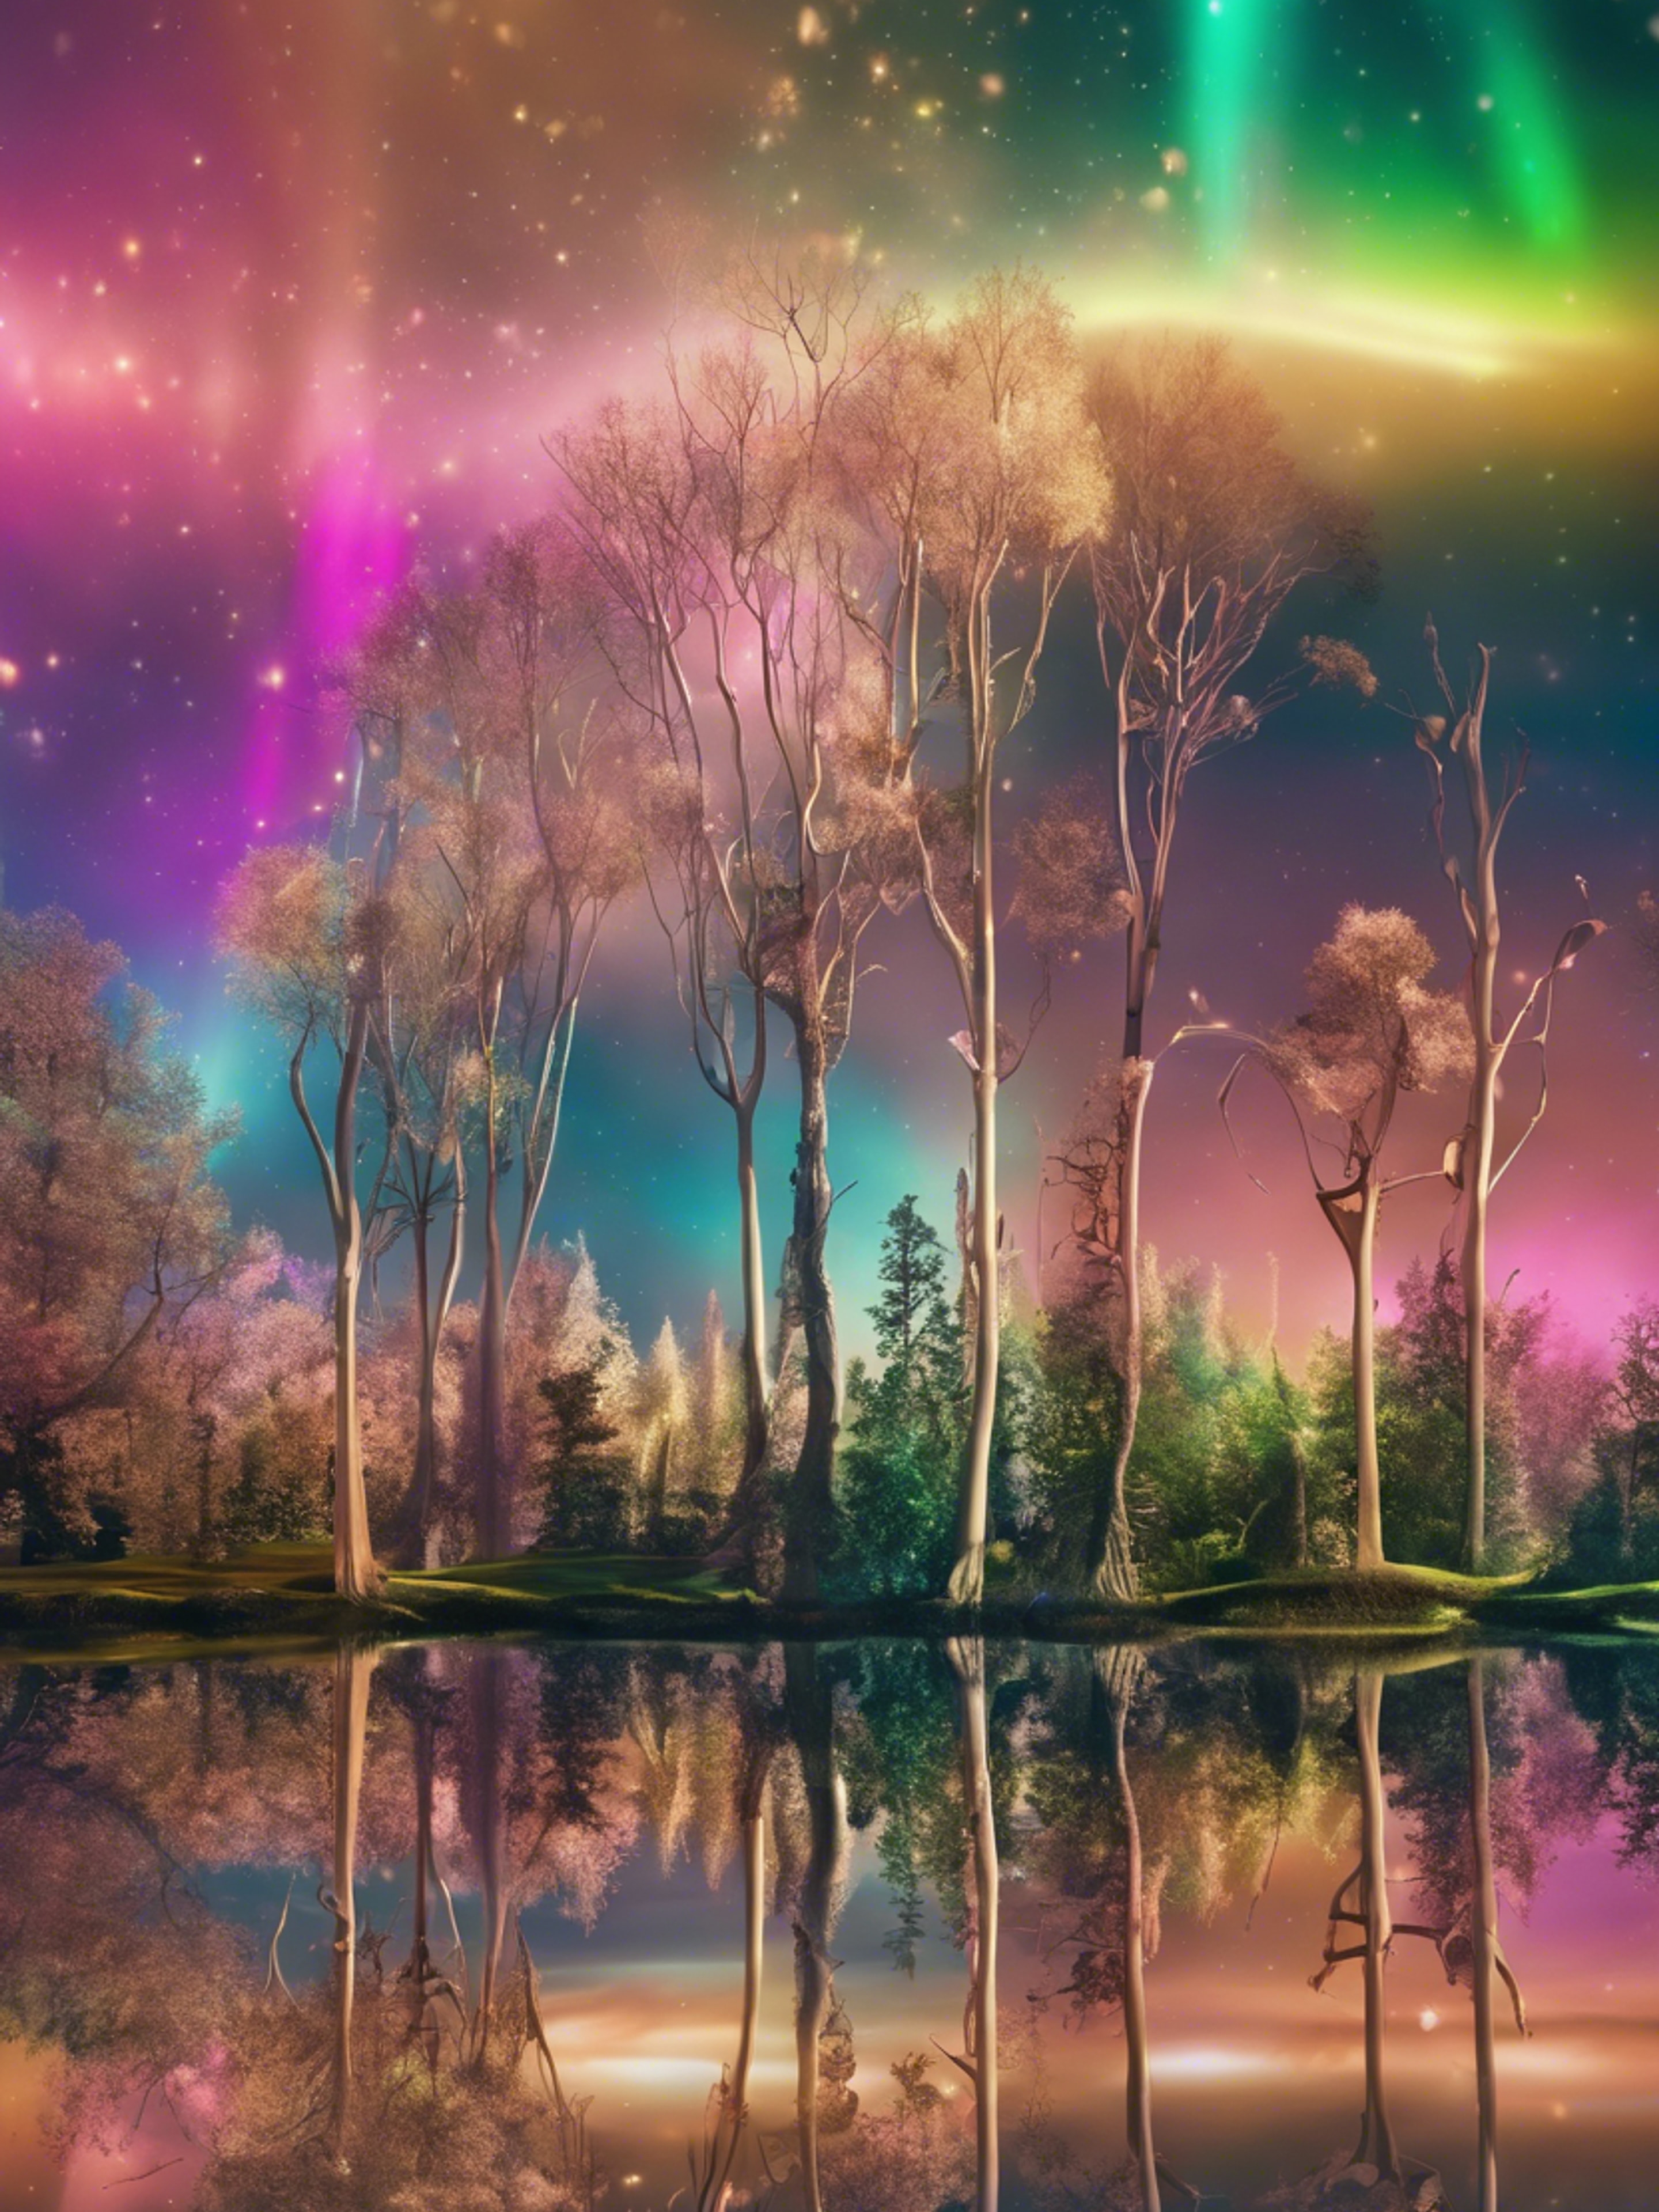 A surreal dream featuring a glass forest under a rainbow aurora sky. 牆紙[55eb39c64d234d5eb704]